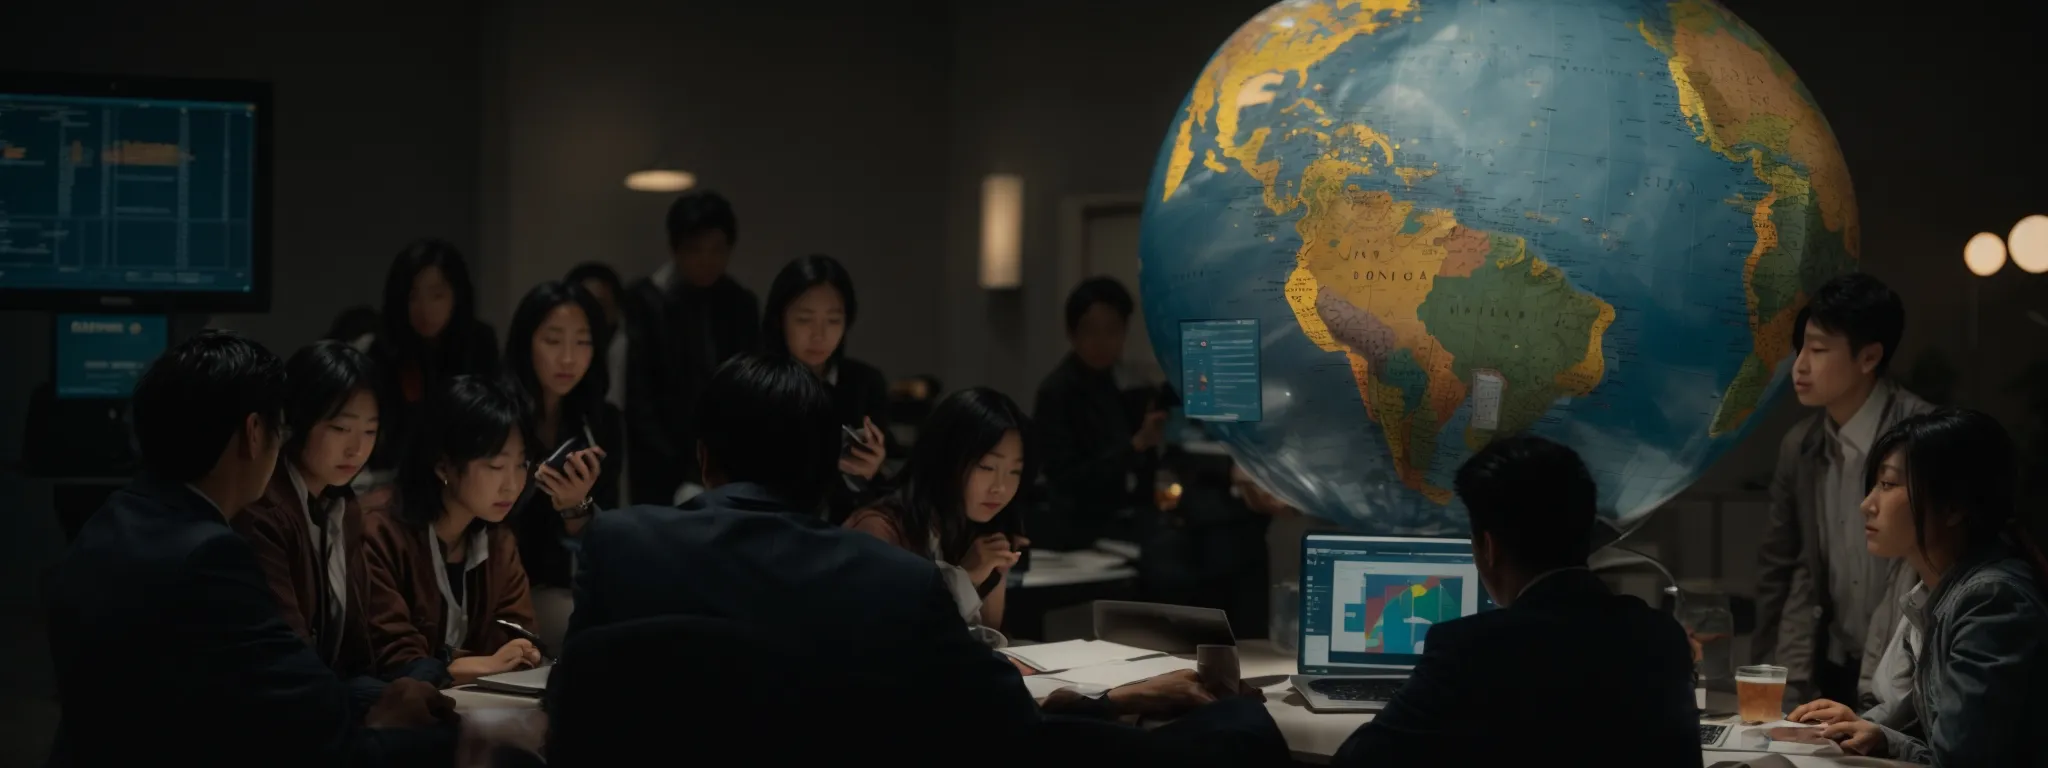 a diverse group of professionals gathers around a large, illuminated globe, discussing strategies with a laptop displaying analytics on the screen.